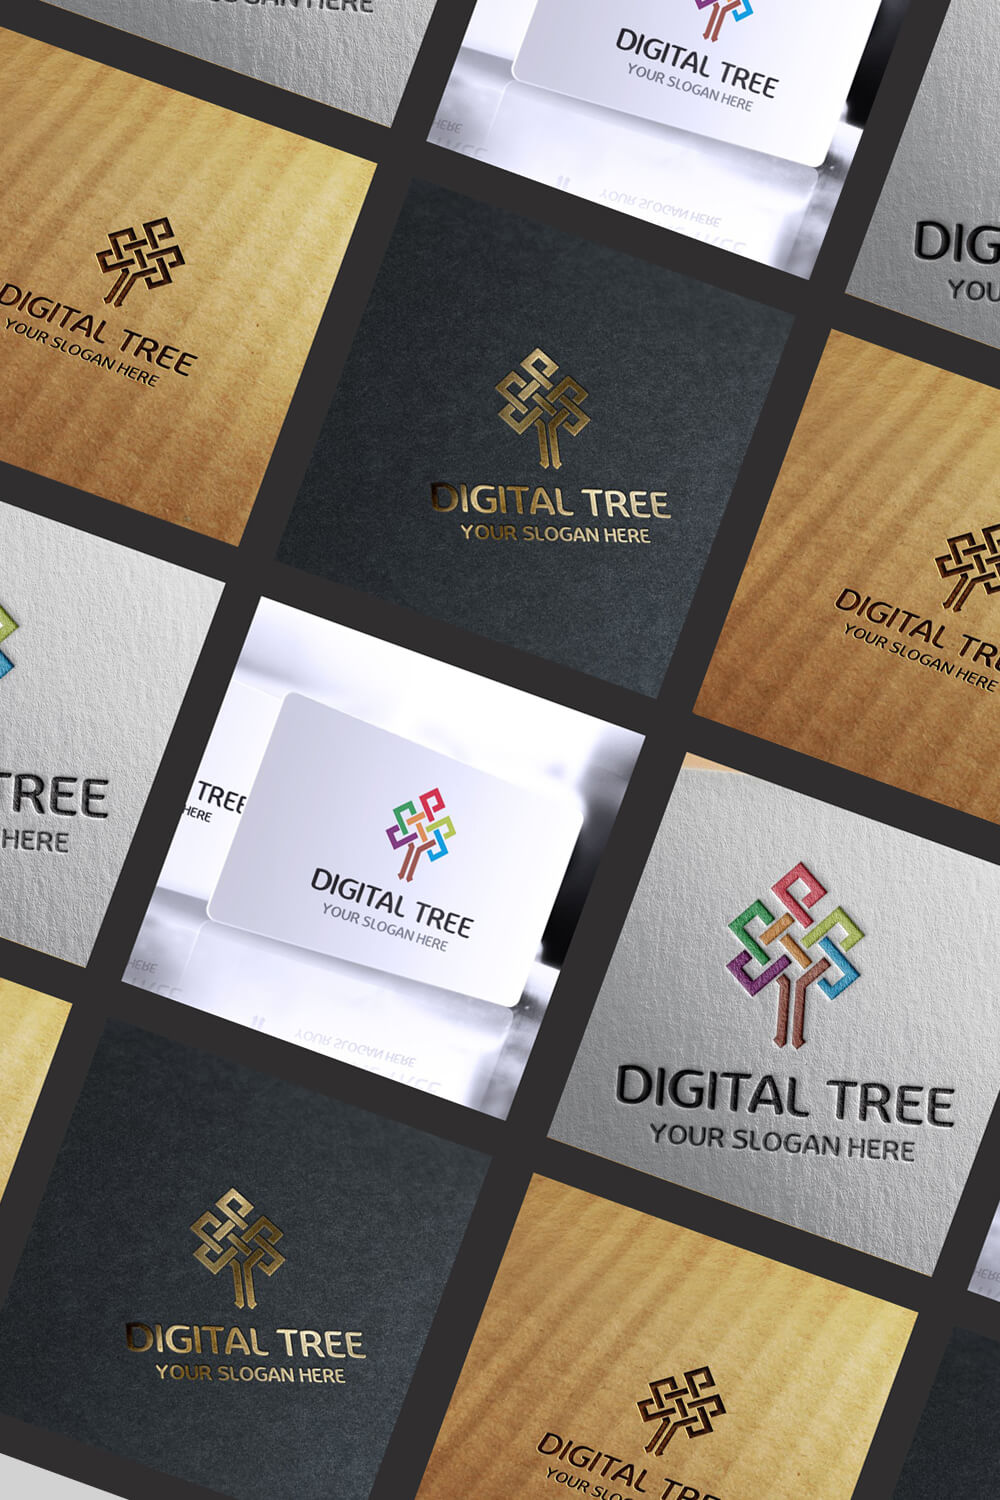 Diagonal image with different digital tree logos.